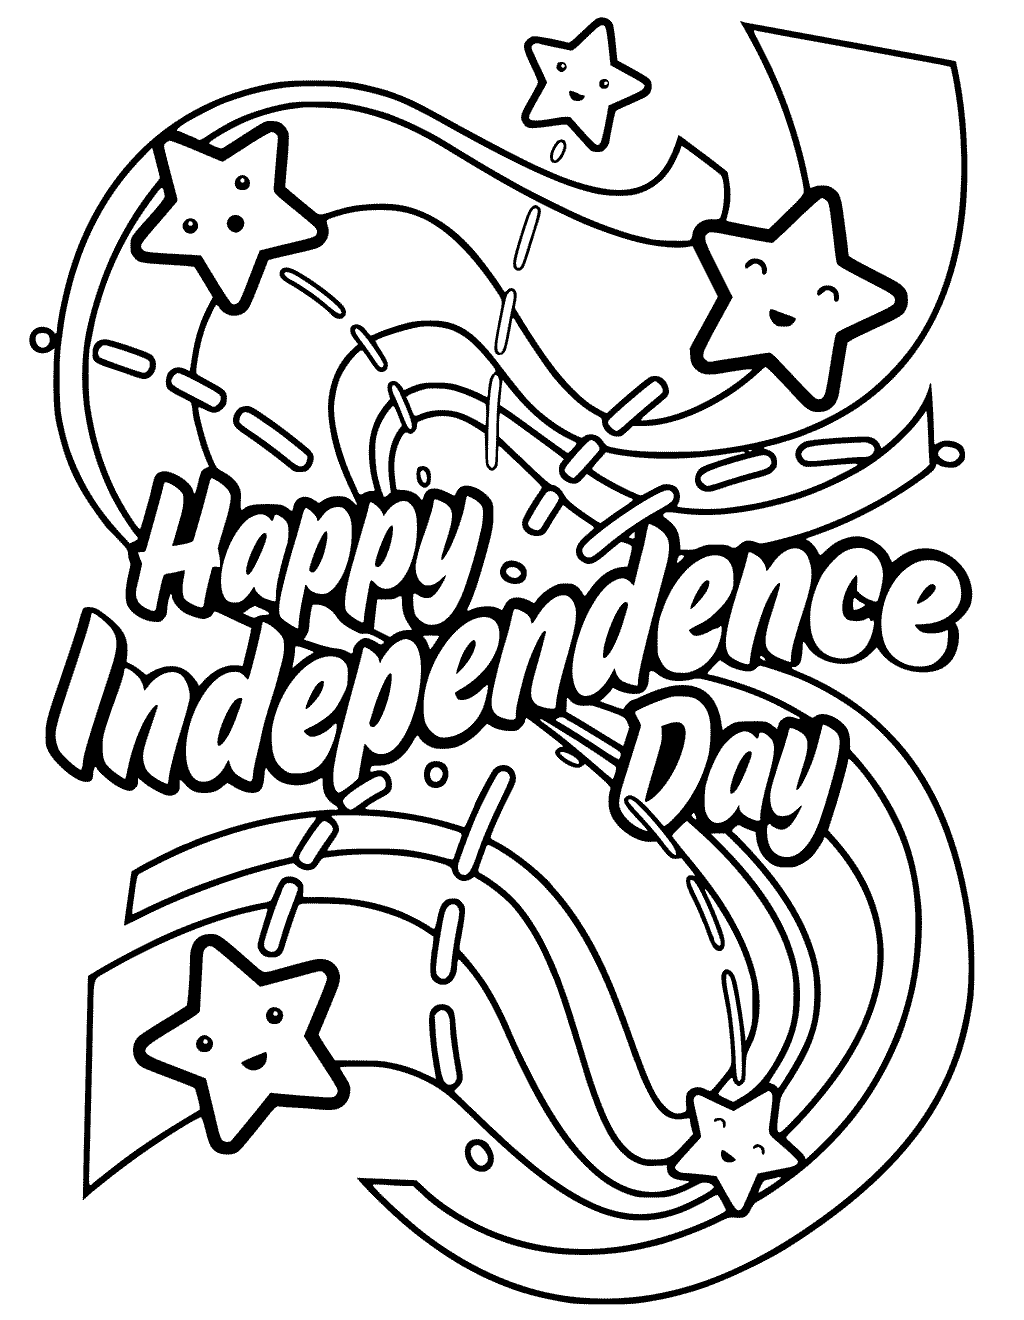 4th of july coloring pages images | august coloring pages | 4th july coloring pages